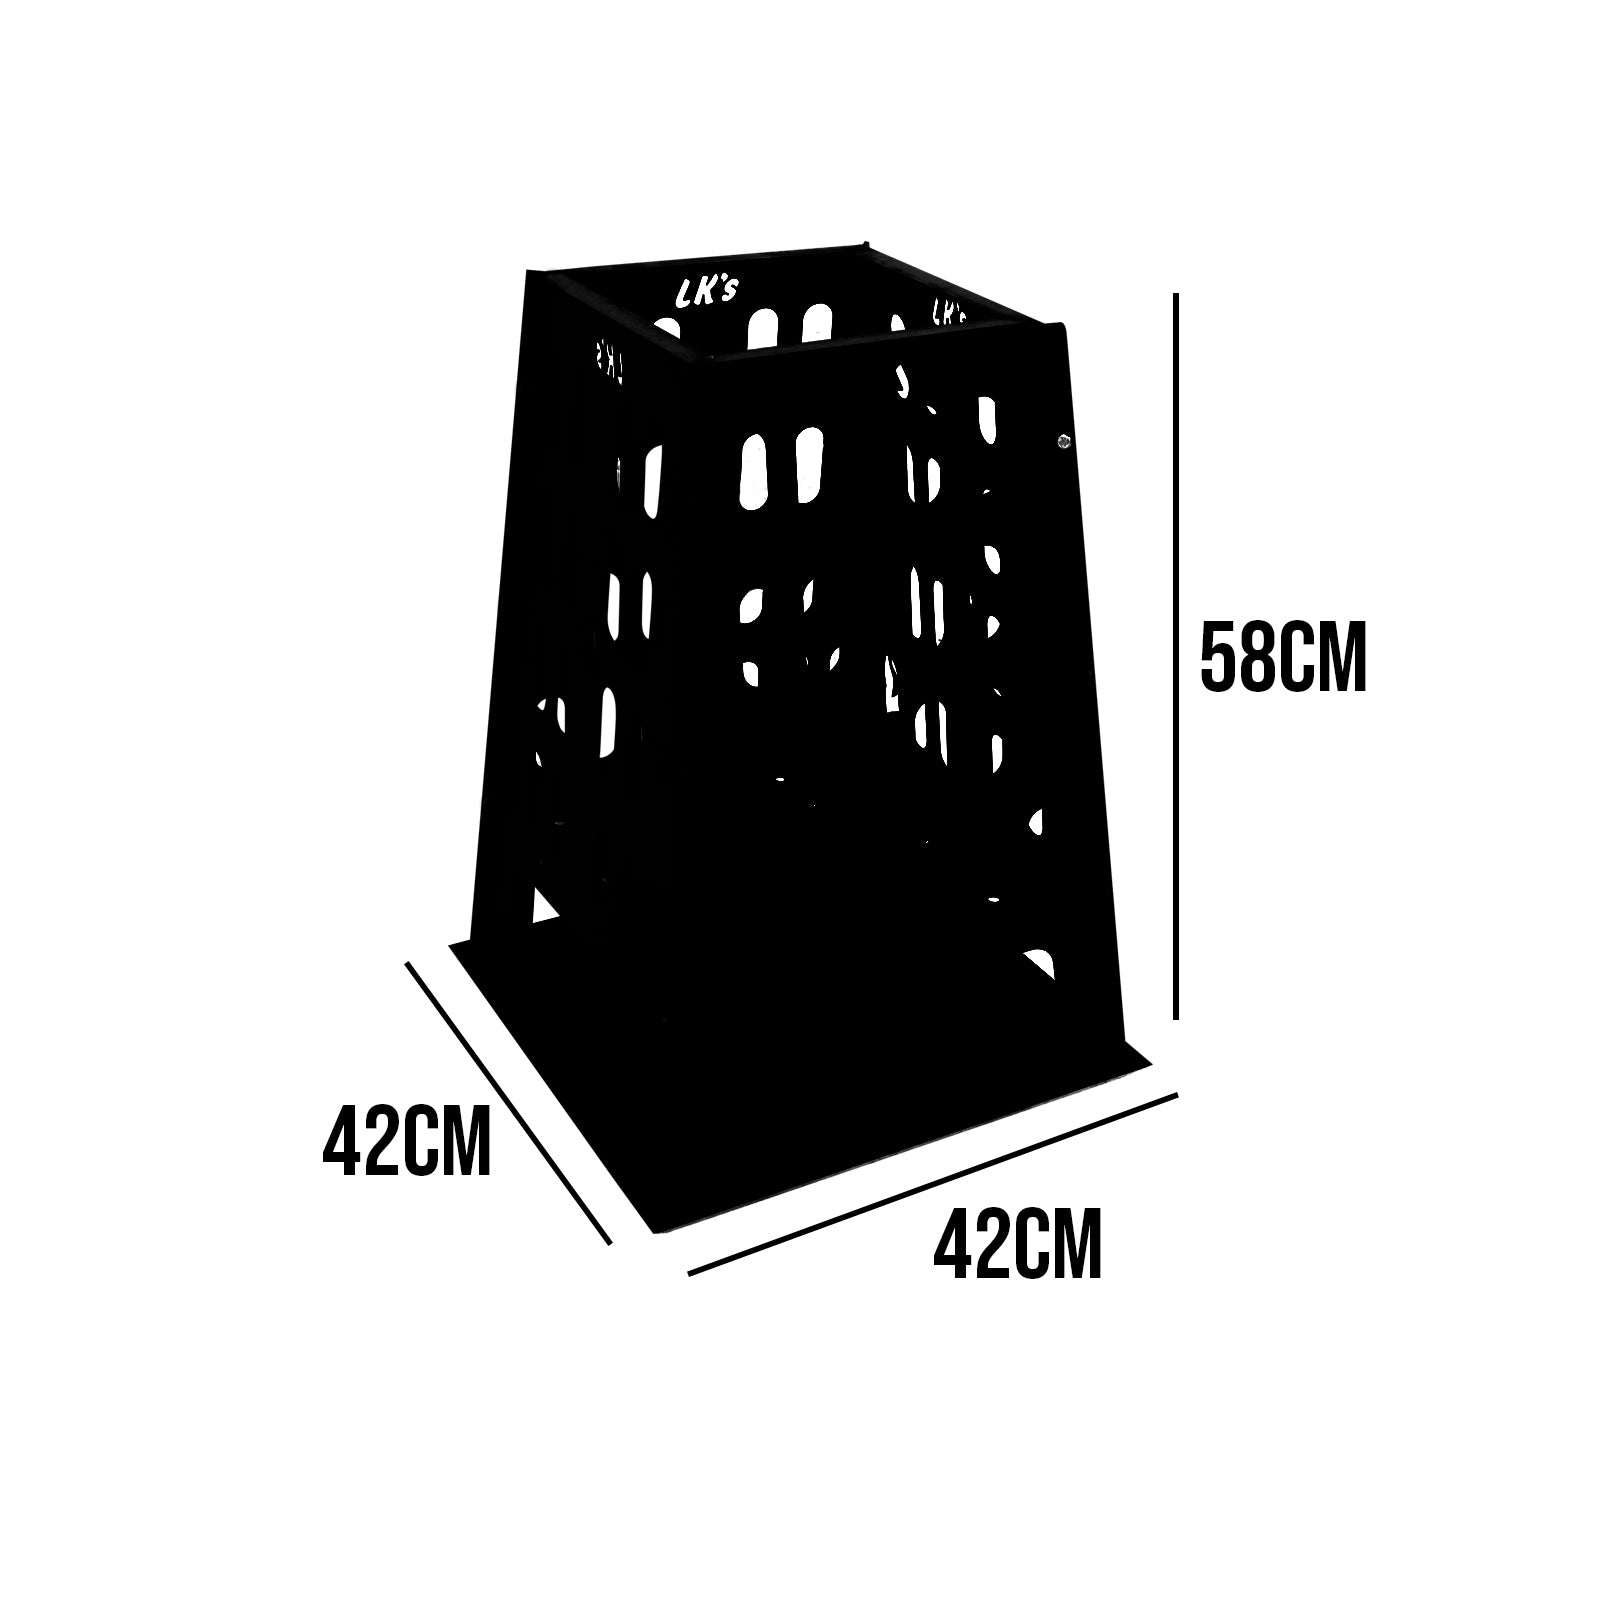 Firepit Tower Dimensions